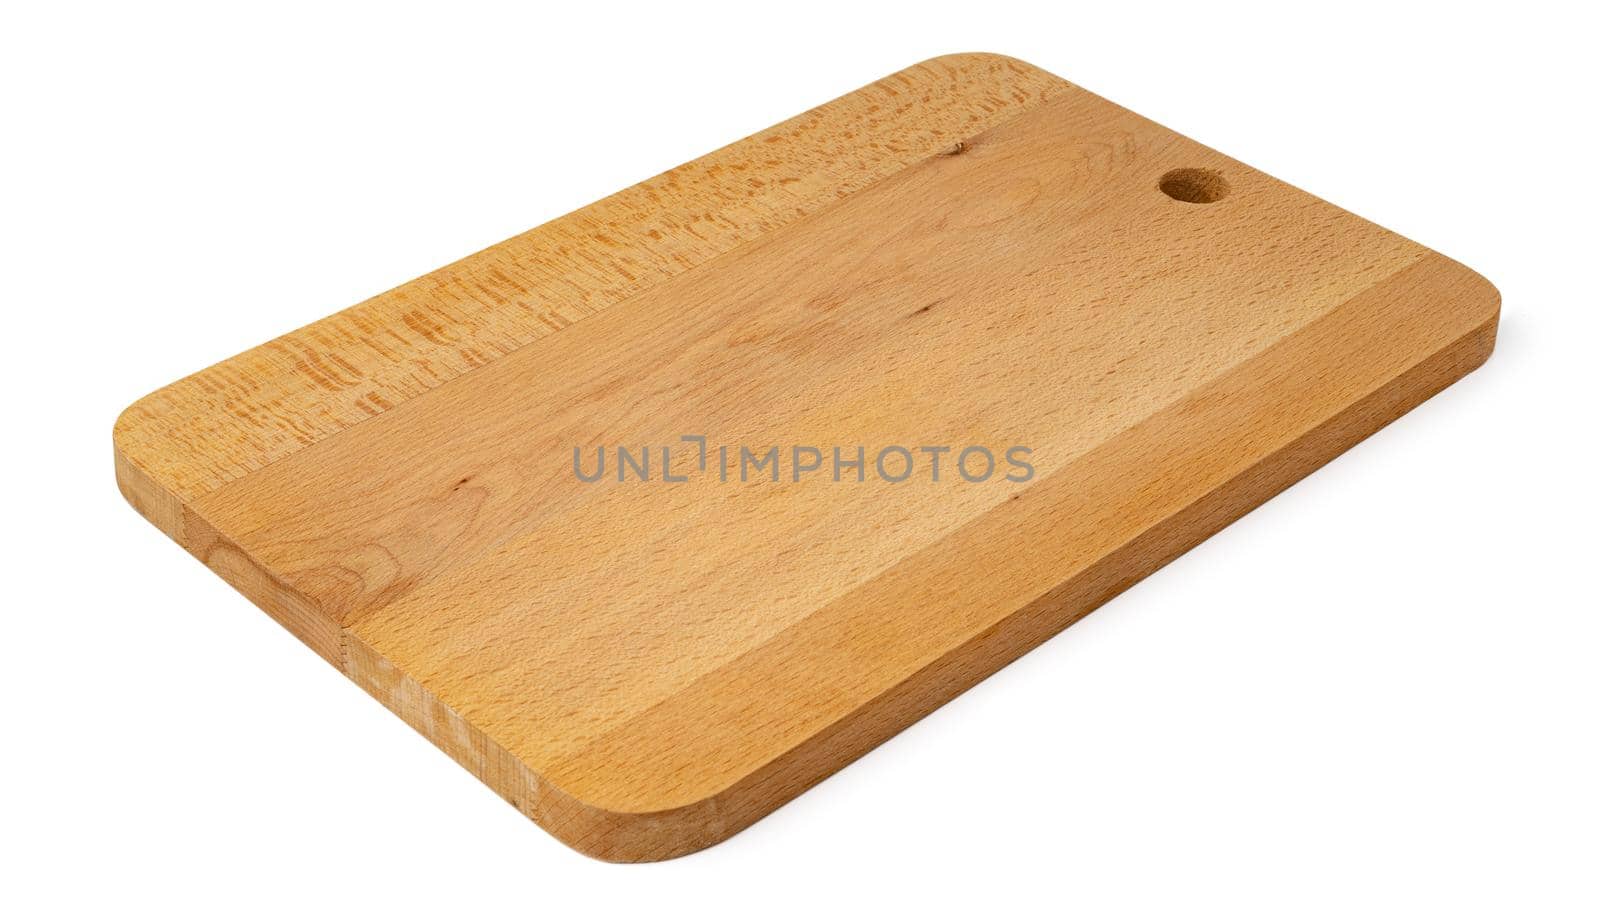 Wooden cutting board on a white background by Fabrikasimf